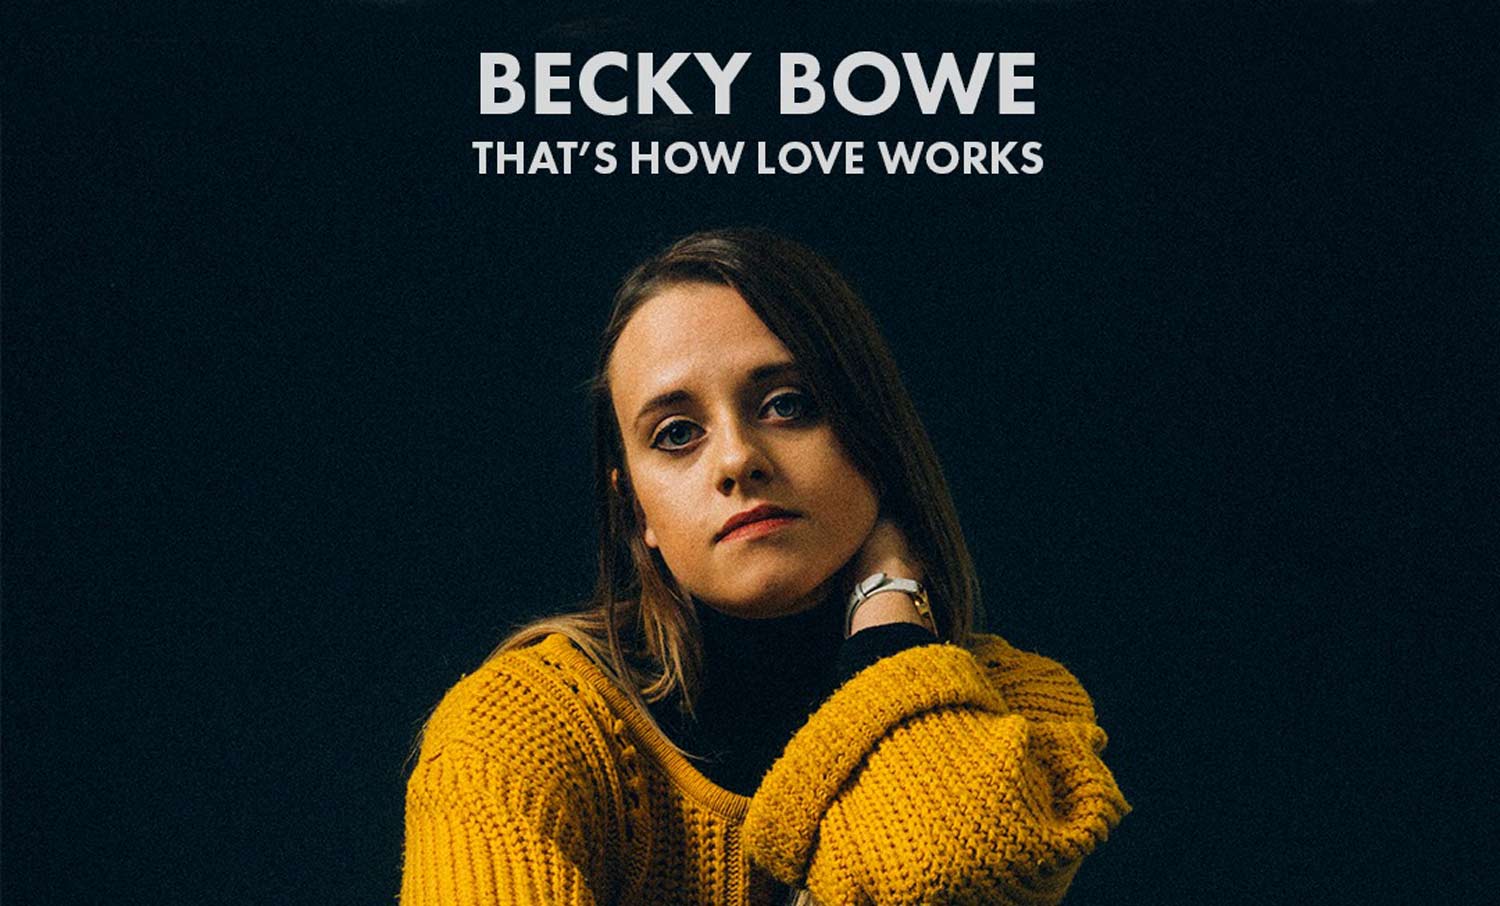 Becky Bowe from Harrogate is ready to wow the world with her stunning single ‘That’s How Love Works.’